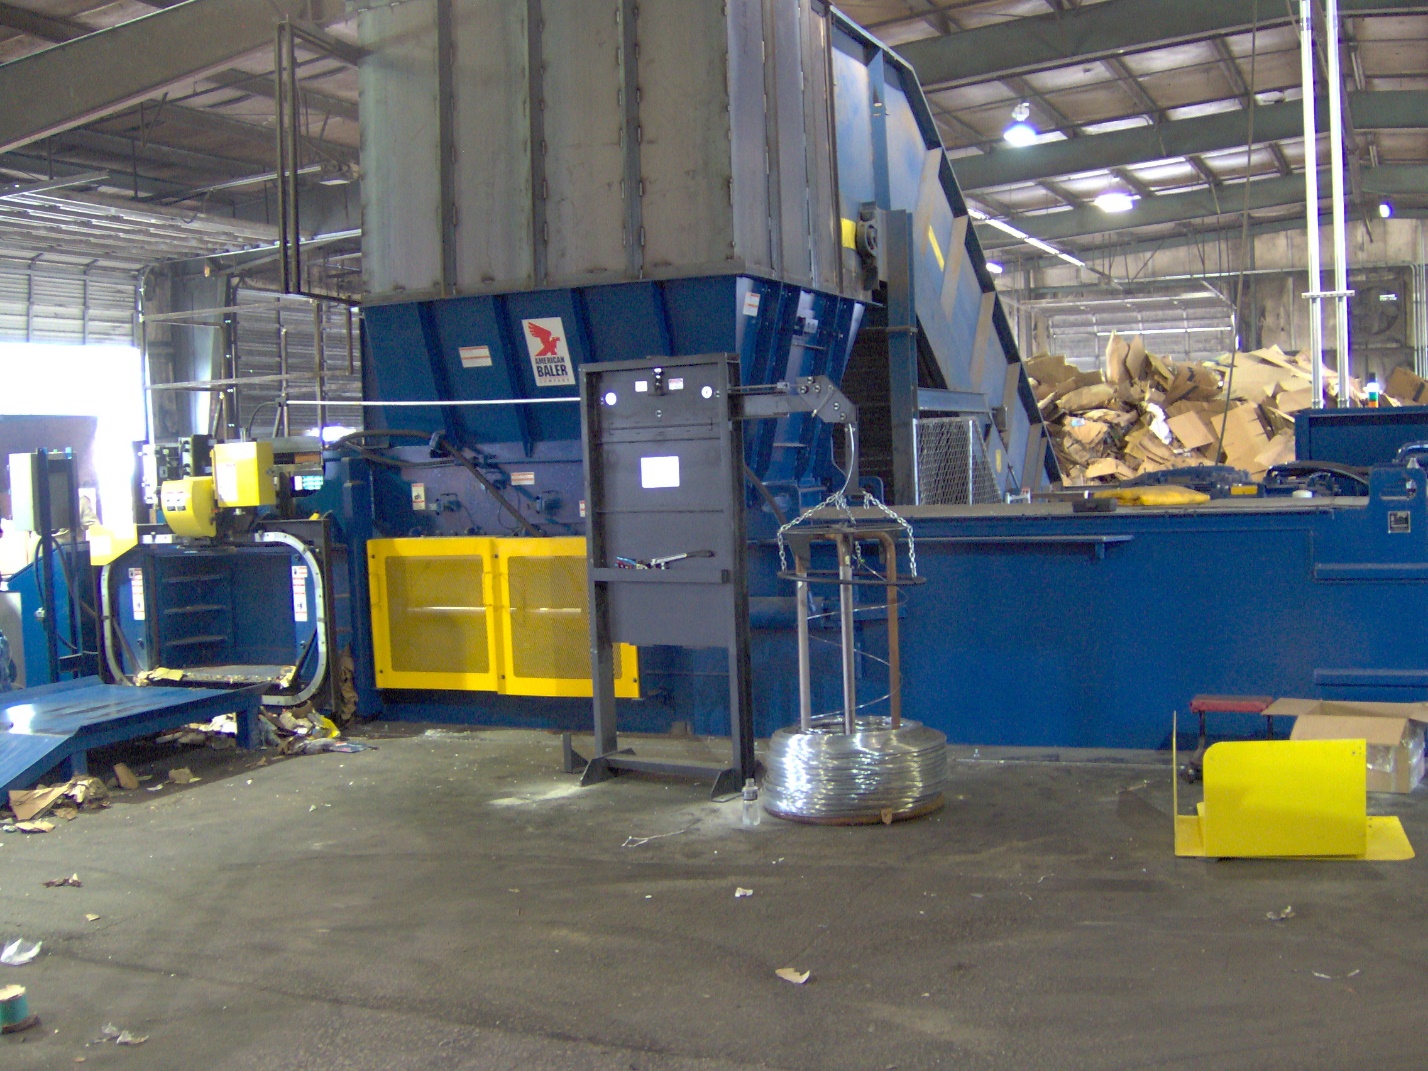 A large blue machine in a warehouse filled with trash.